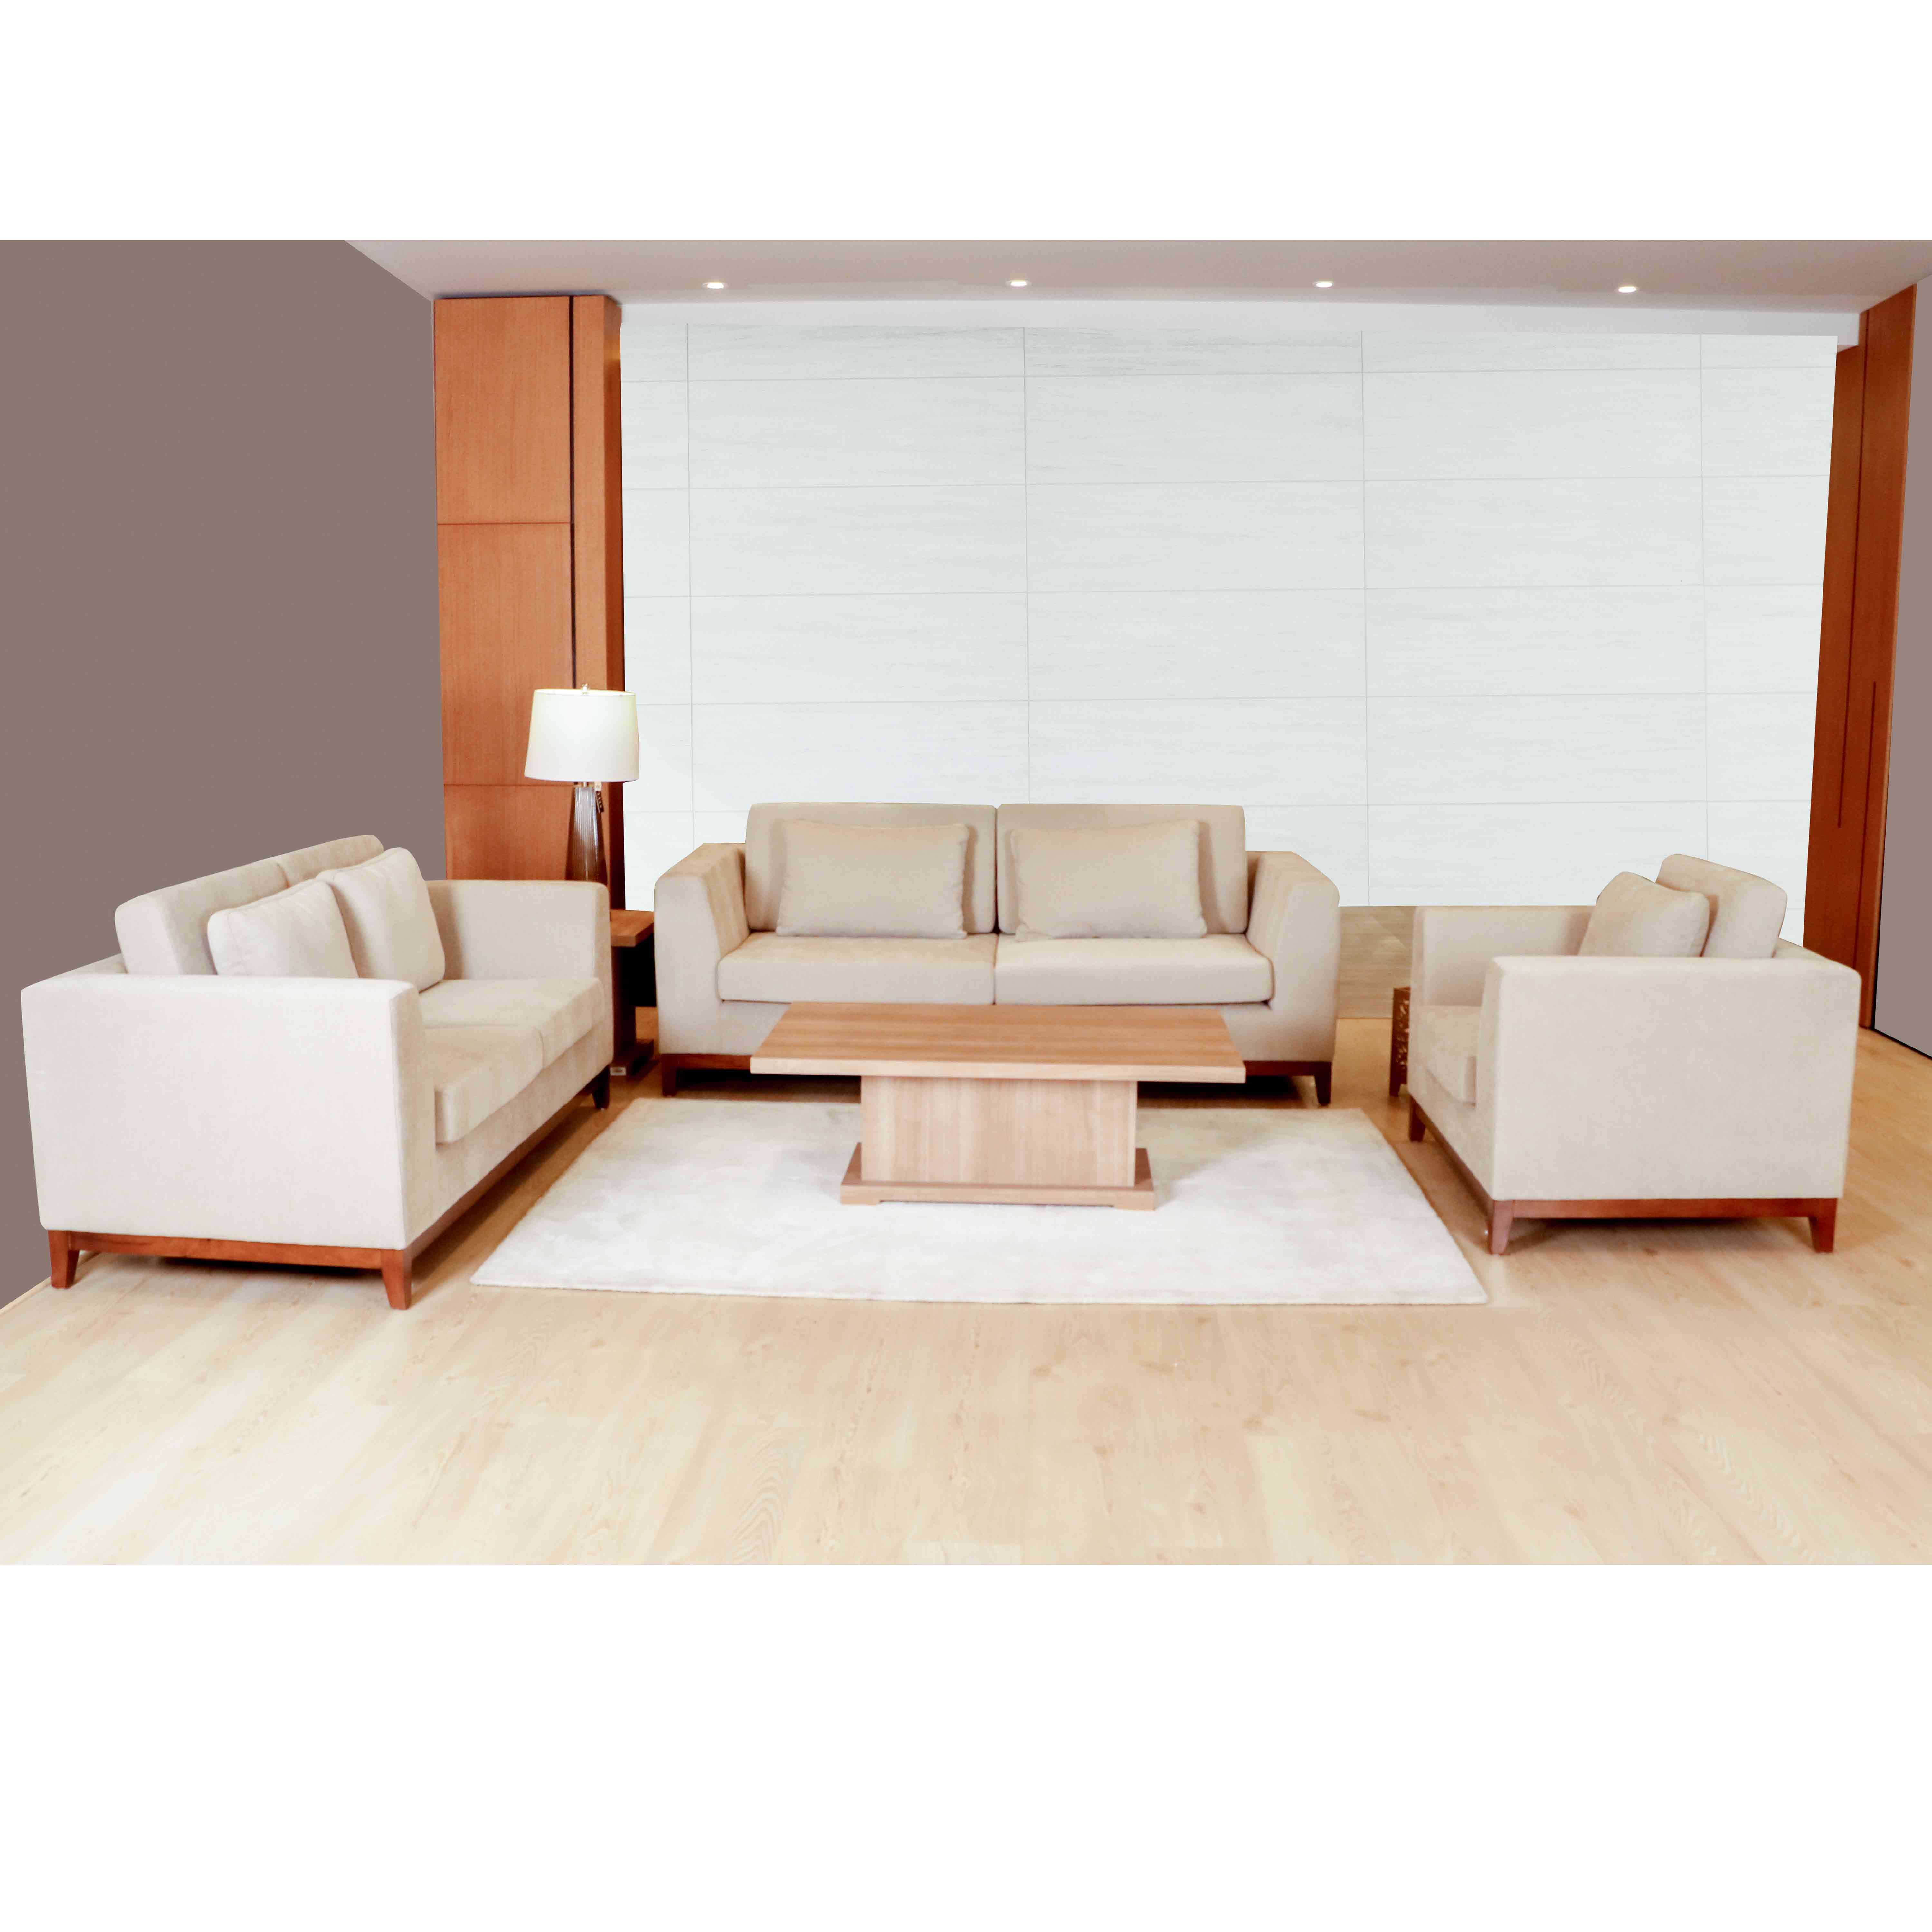 S751 3 SEATER SOFA WITH FABRIC SIZE 210X85CM QF1048-4 BEIGE